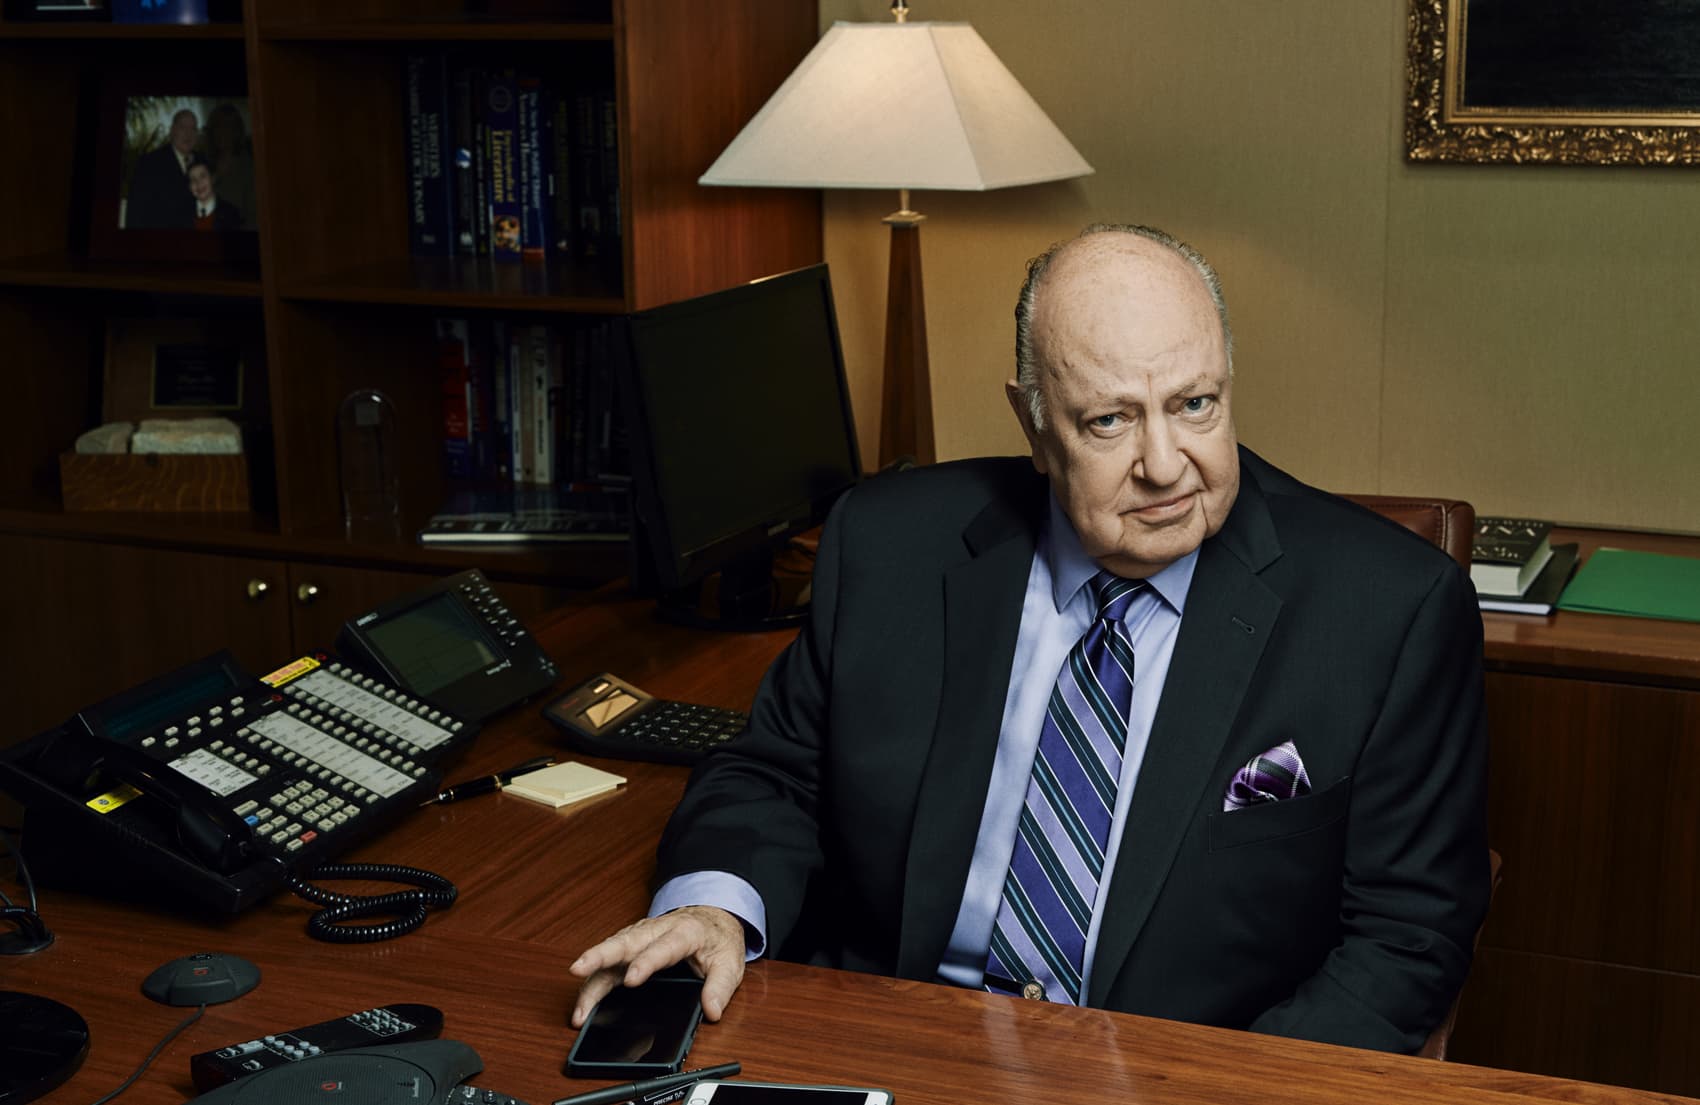 Roger Ailes poses in his office, 2015, in &quot;Divide and Conquer: The Story of Roger Ailes,&quot; a Magnolia Pictures release. (Wesley Mann. Photo courtesy of Magnolia Pictures)